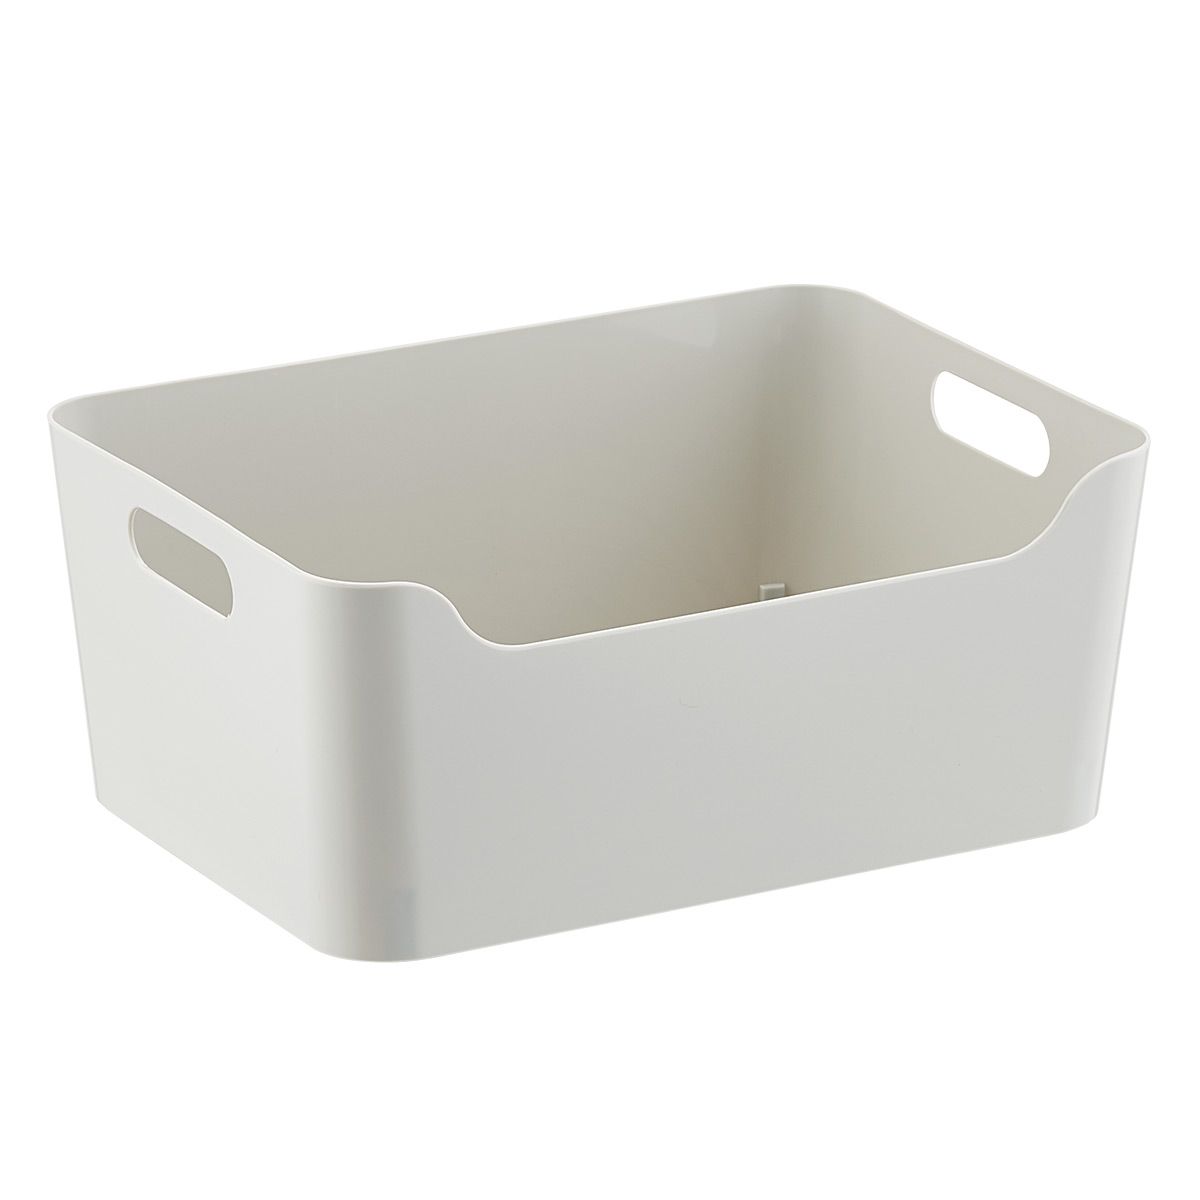 Medium Plastic Storage Bin w/ Handles Light Grey4.9106 Reviews$3.74/eaReg $4.99/eaSave $1.25 (25%... | The Container Store